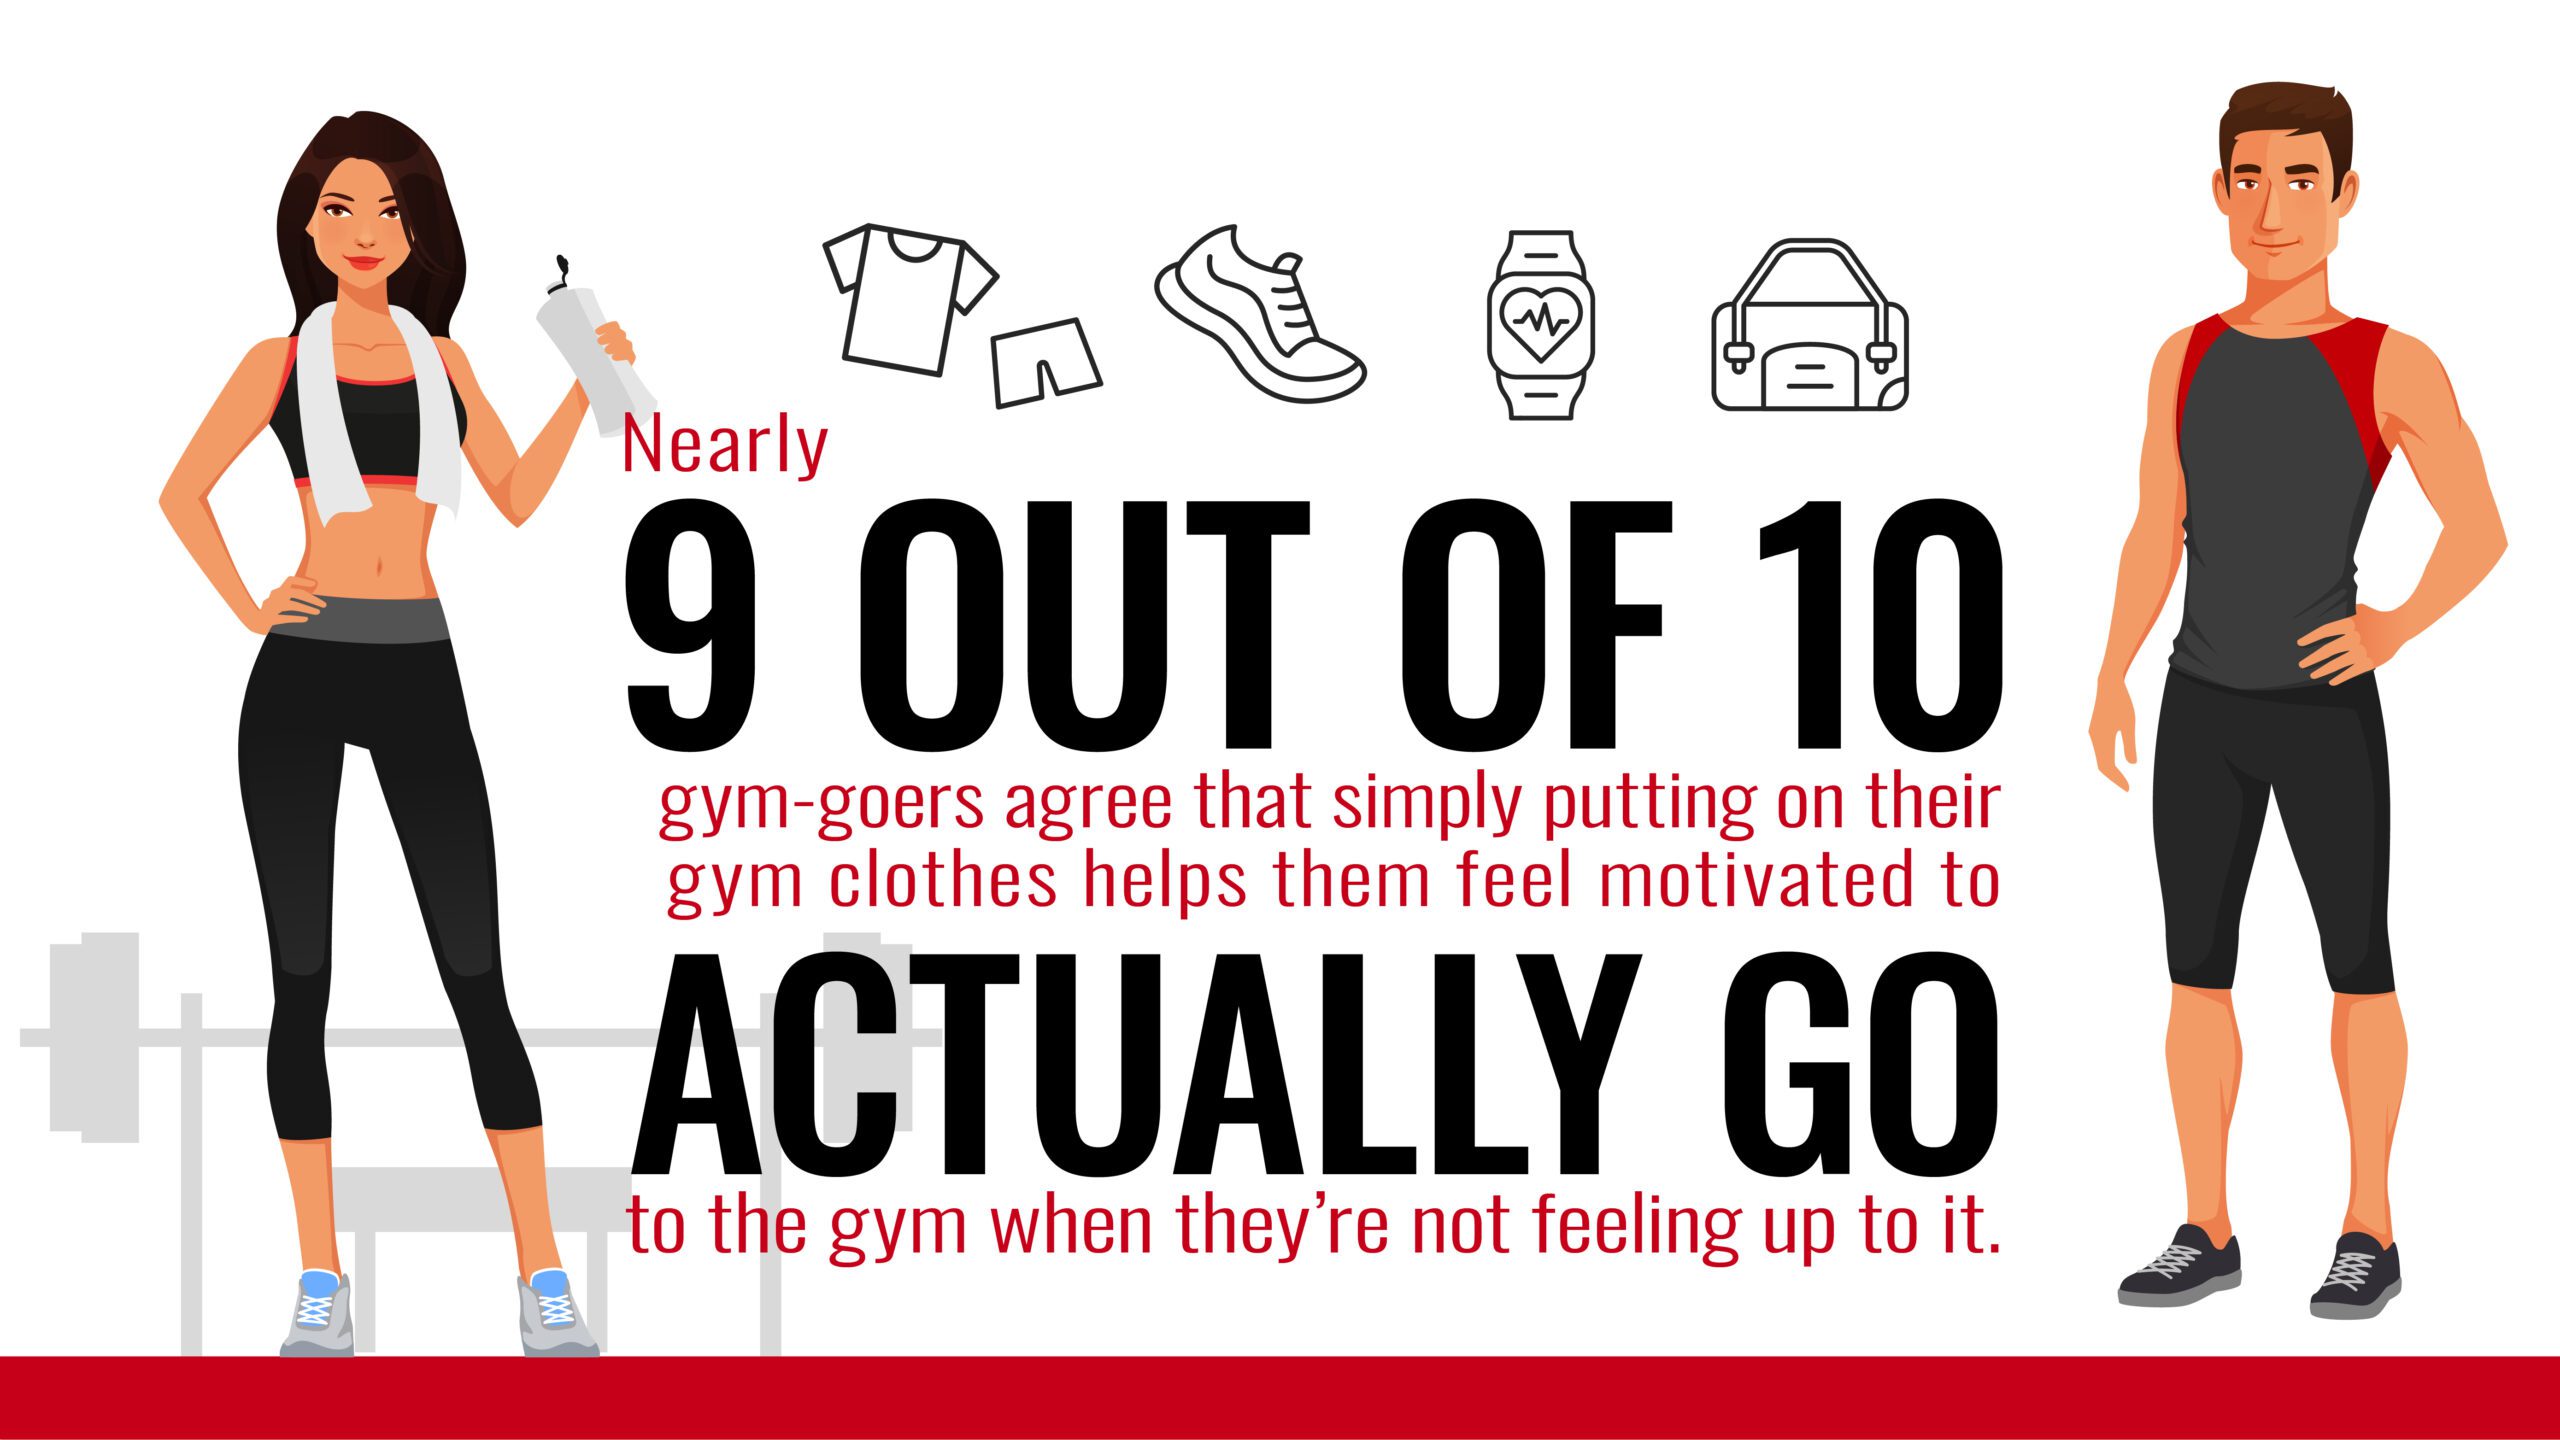 5 Reasons Gym Clothing is Important